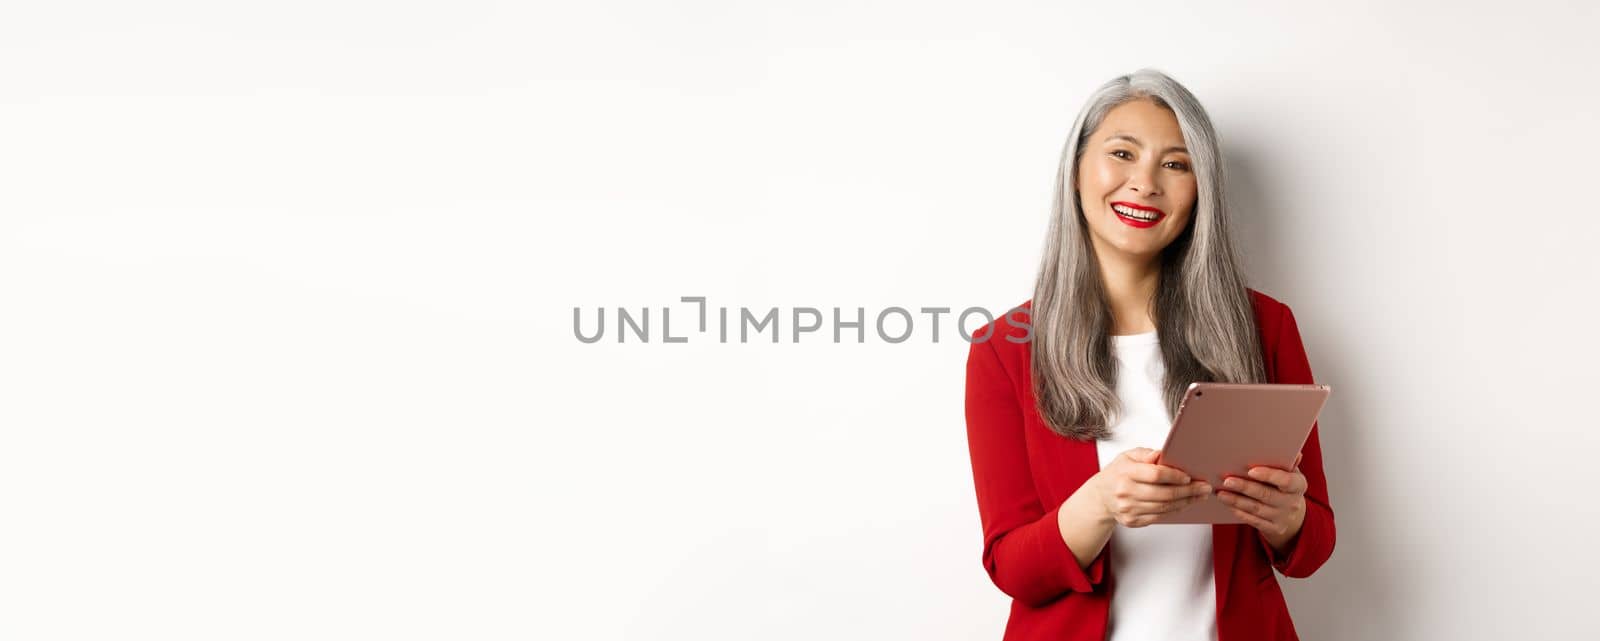 Business. Successful senior businesswoman working with digital tablet and smiling, standing in red blazer over white background.